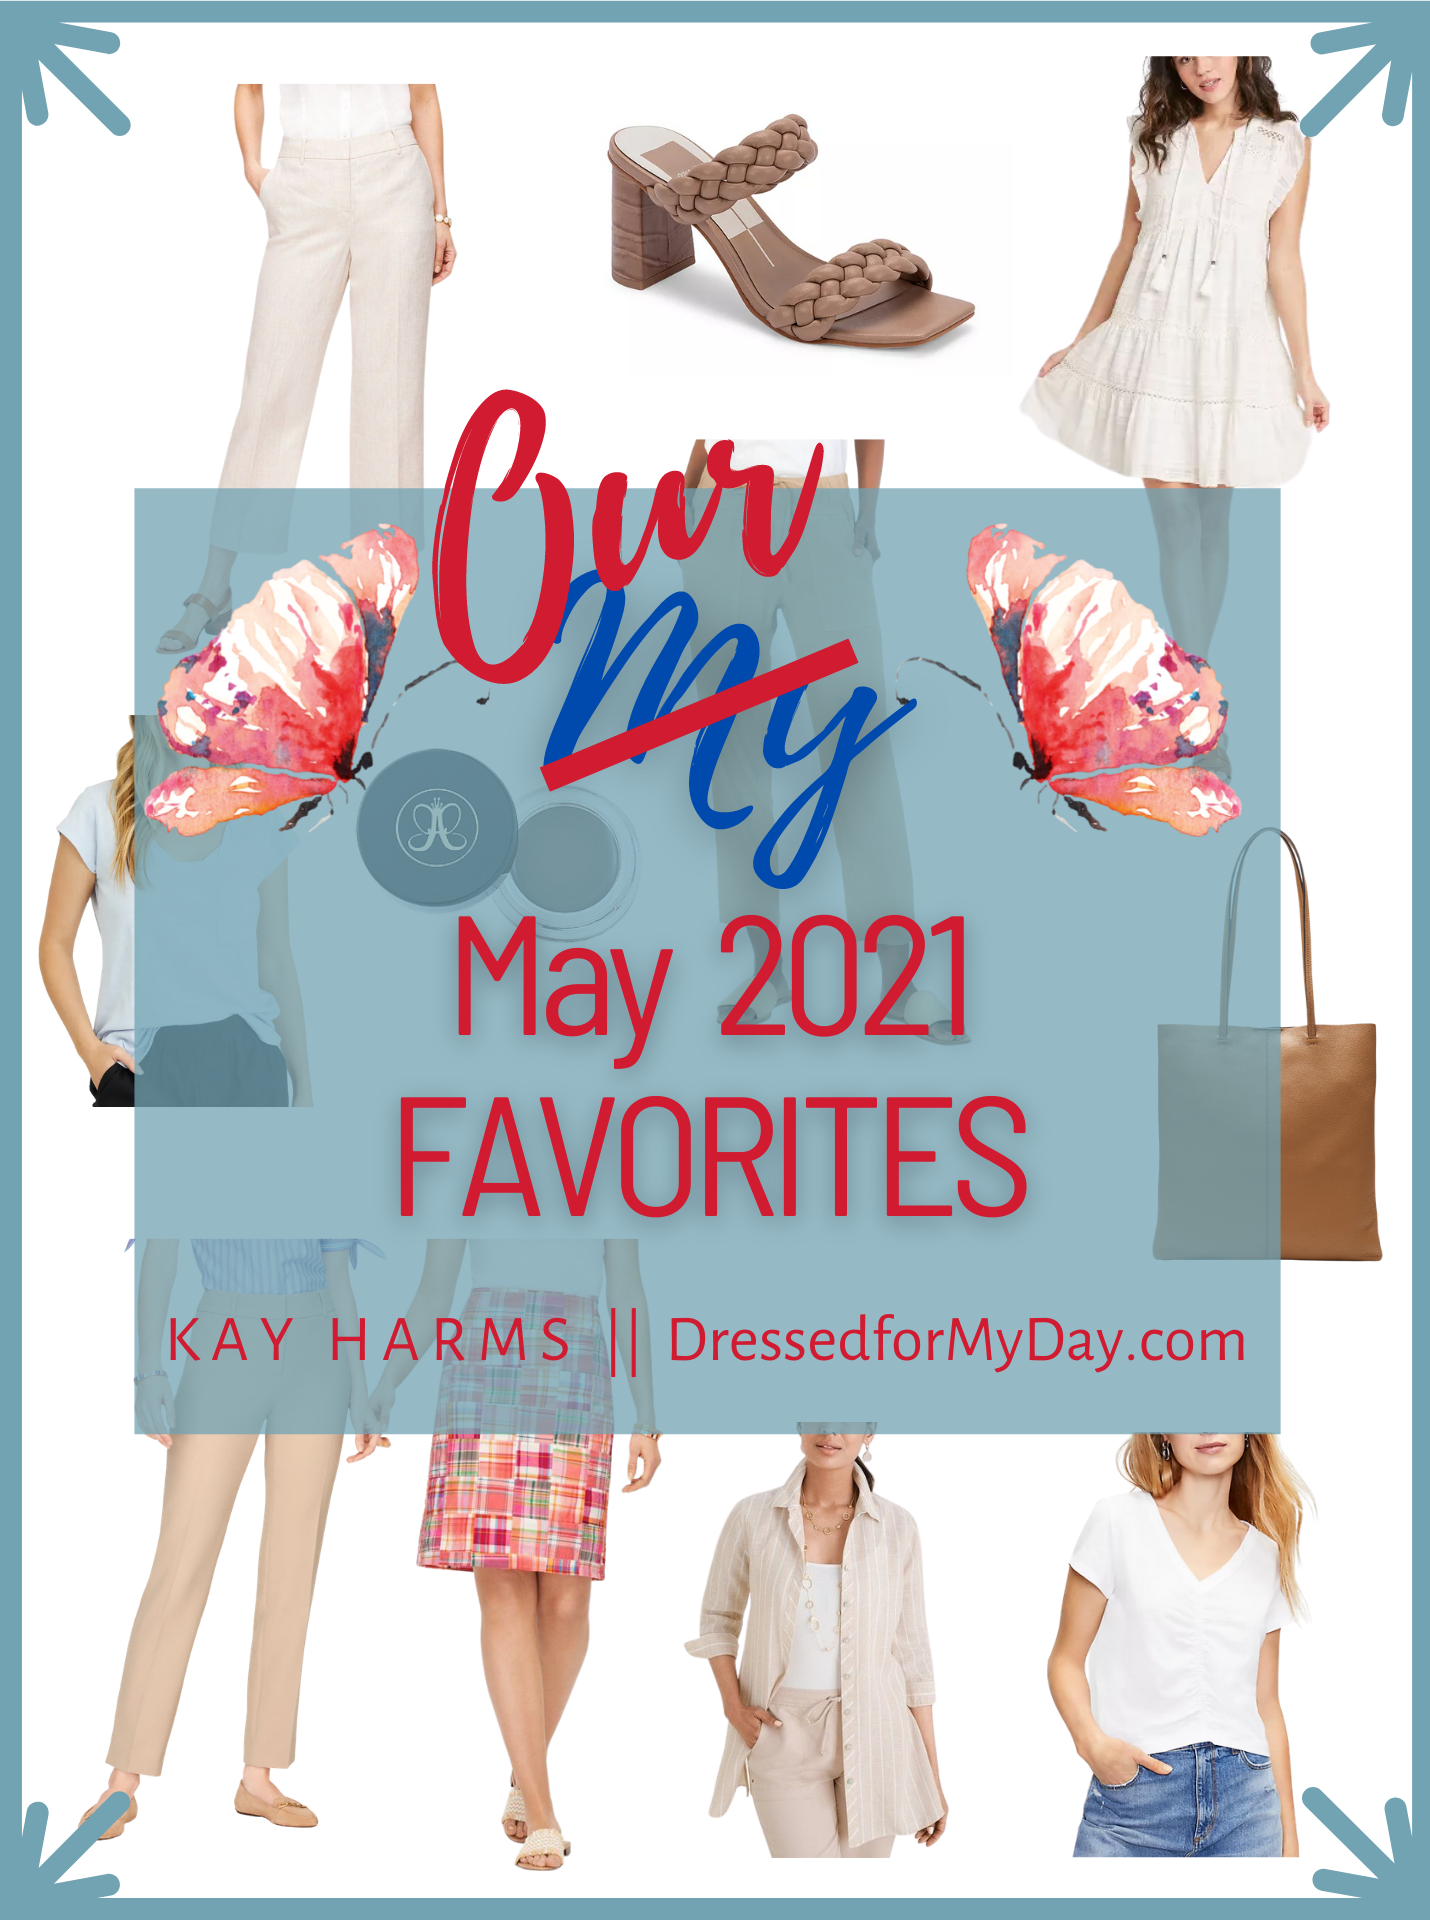 Our May 2021 Favorites